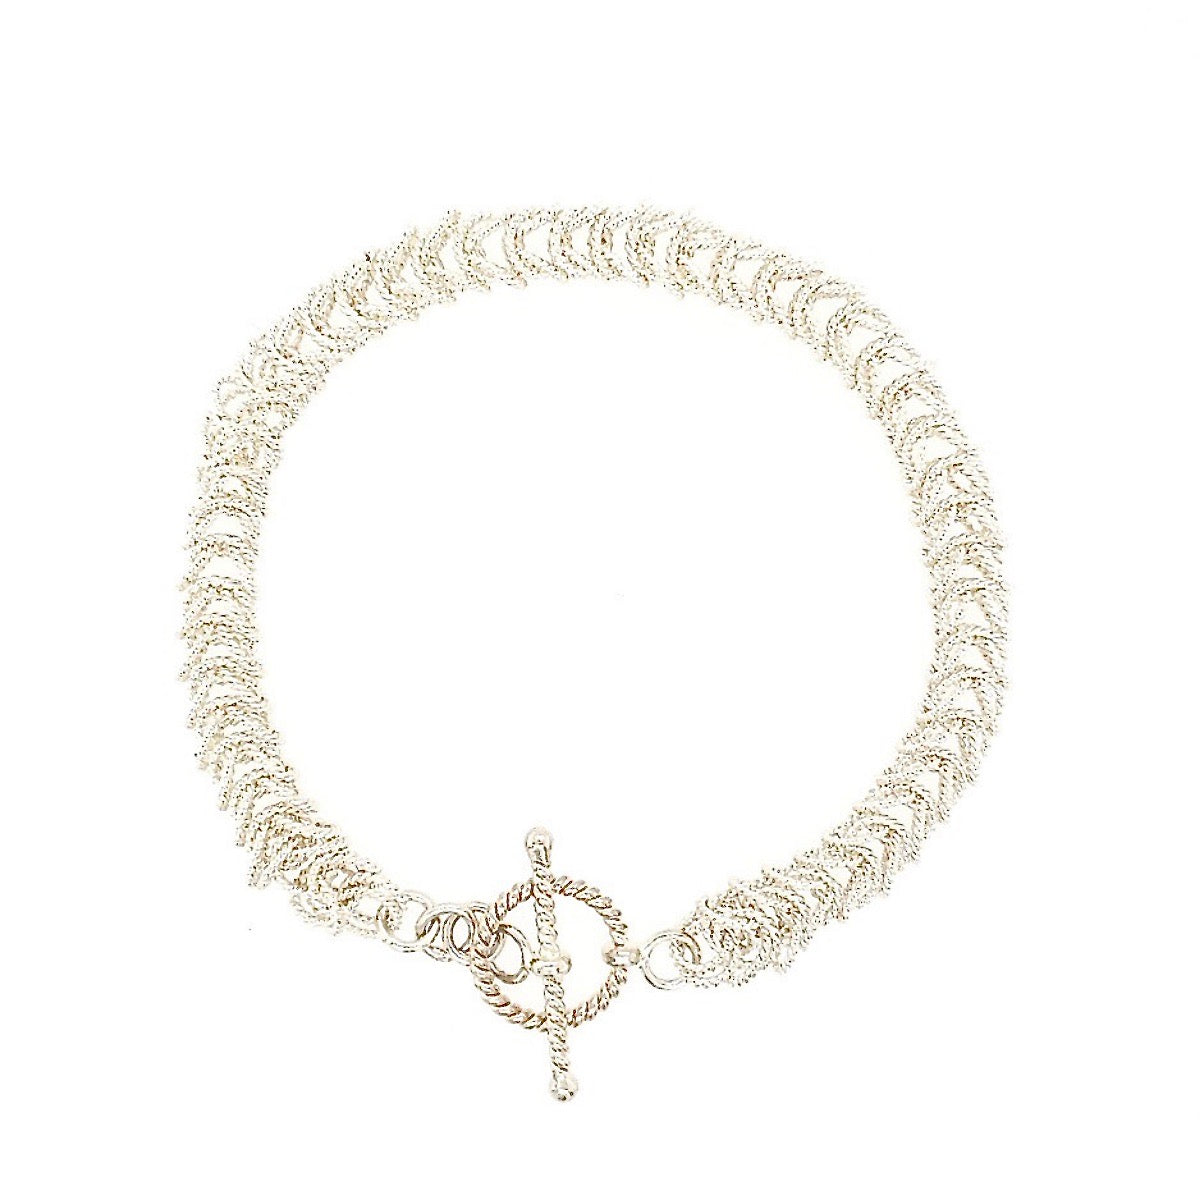 Arpaia Silver Bellezza Bracelet - main image with white background using a light box